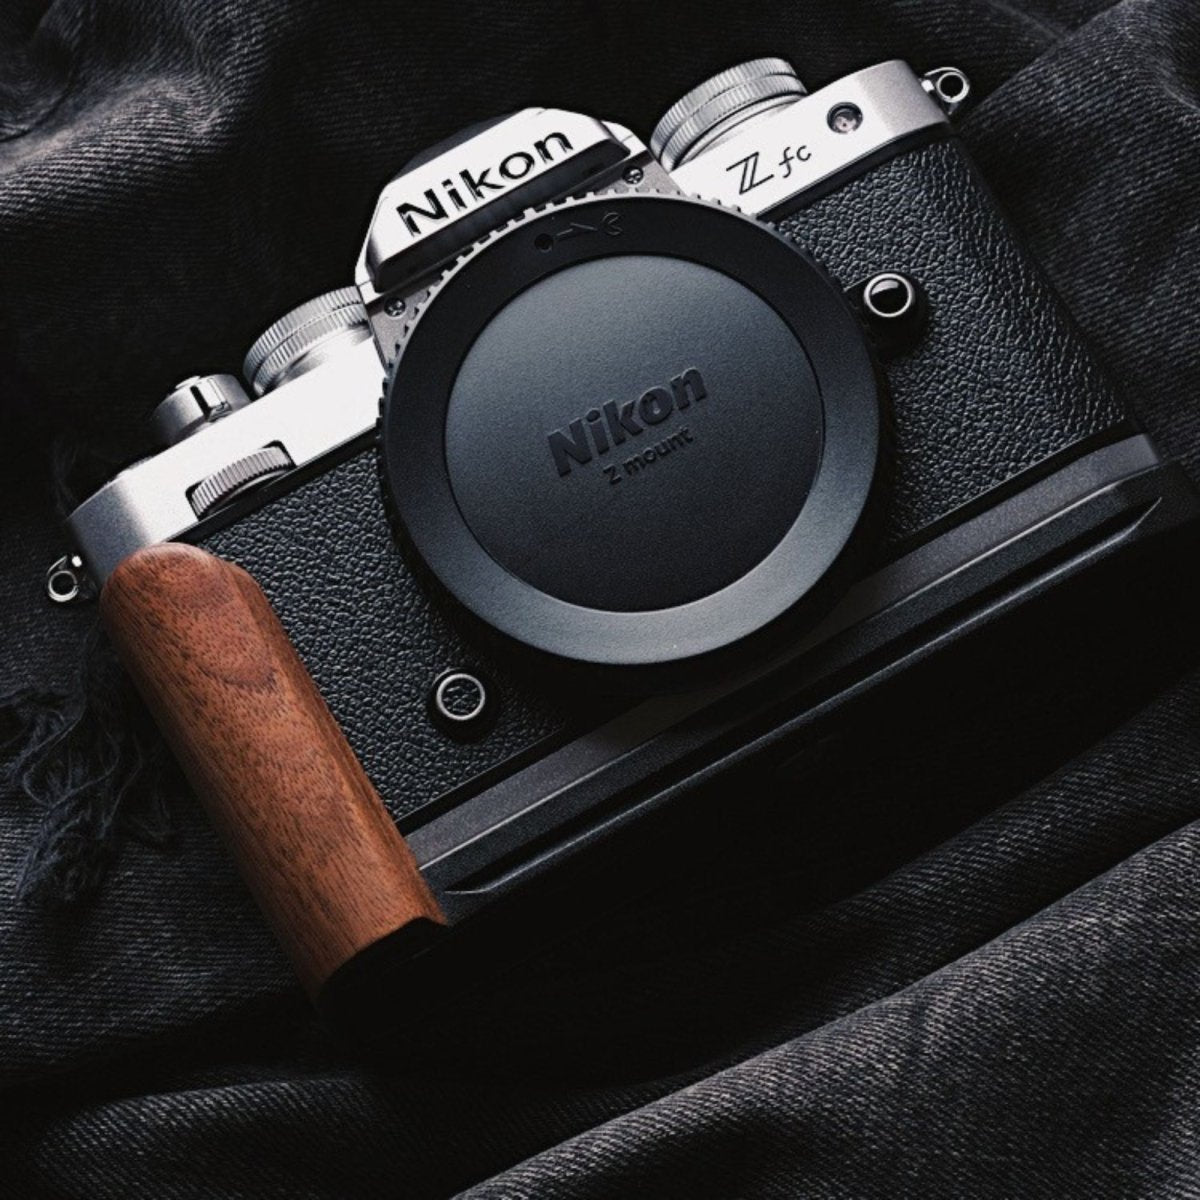 Enhance Your Photography with the Wooden Nikon Zfc Hand Grip by iWoodStore Accessories - iWoodStore